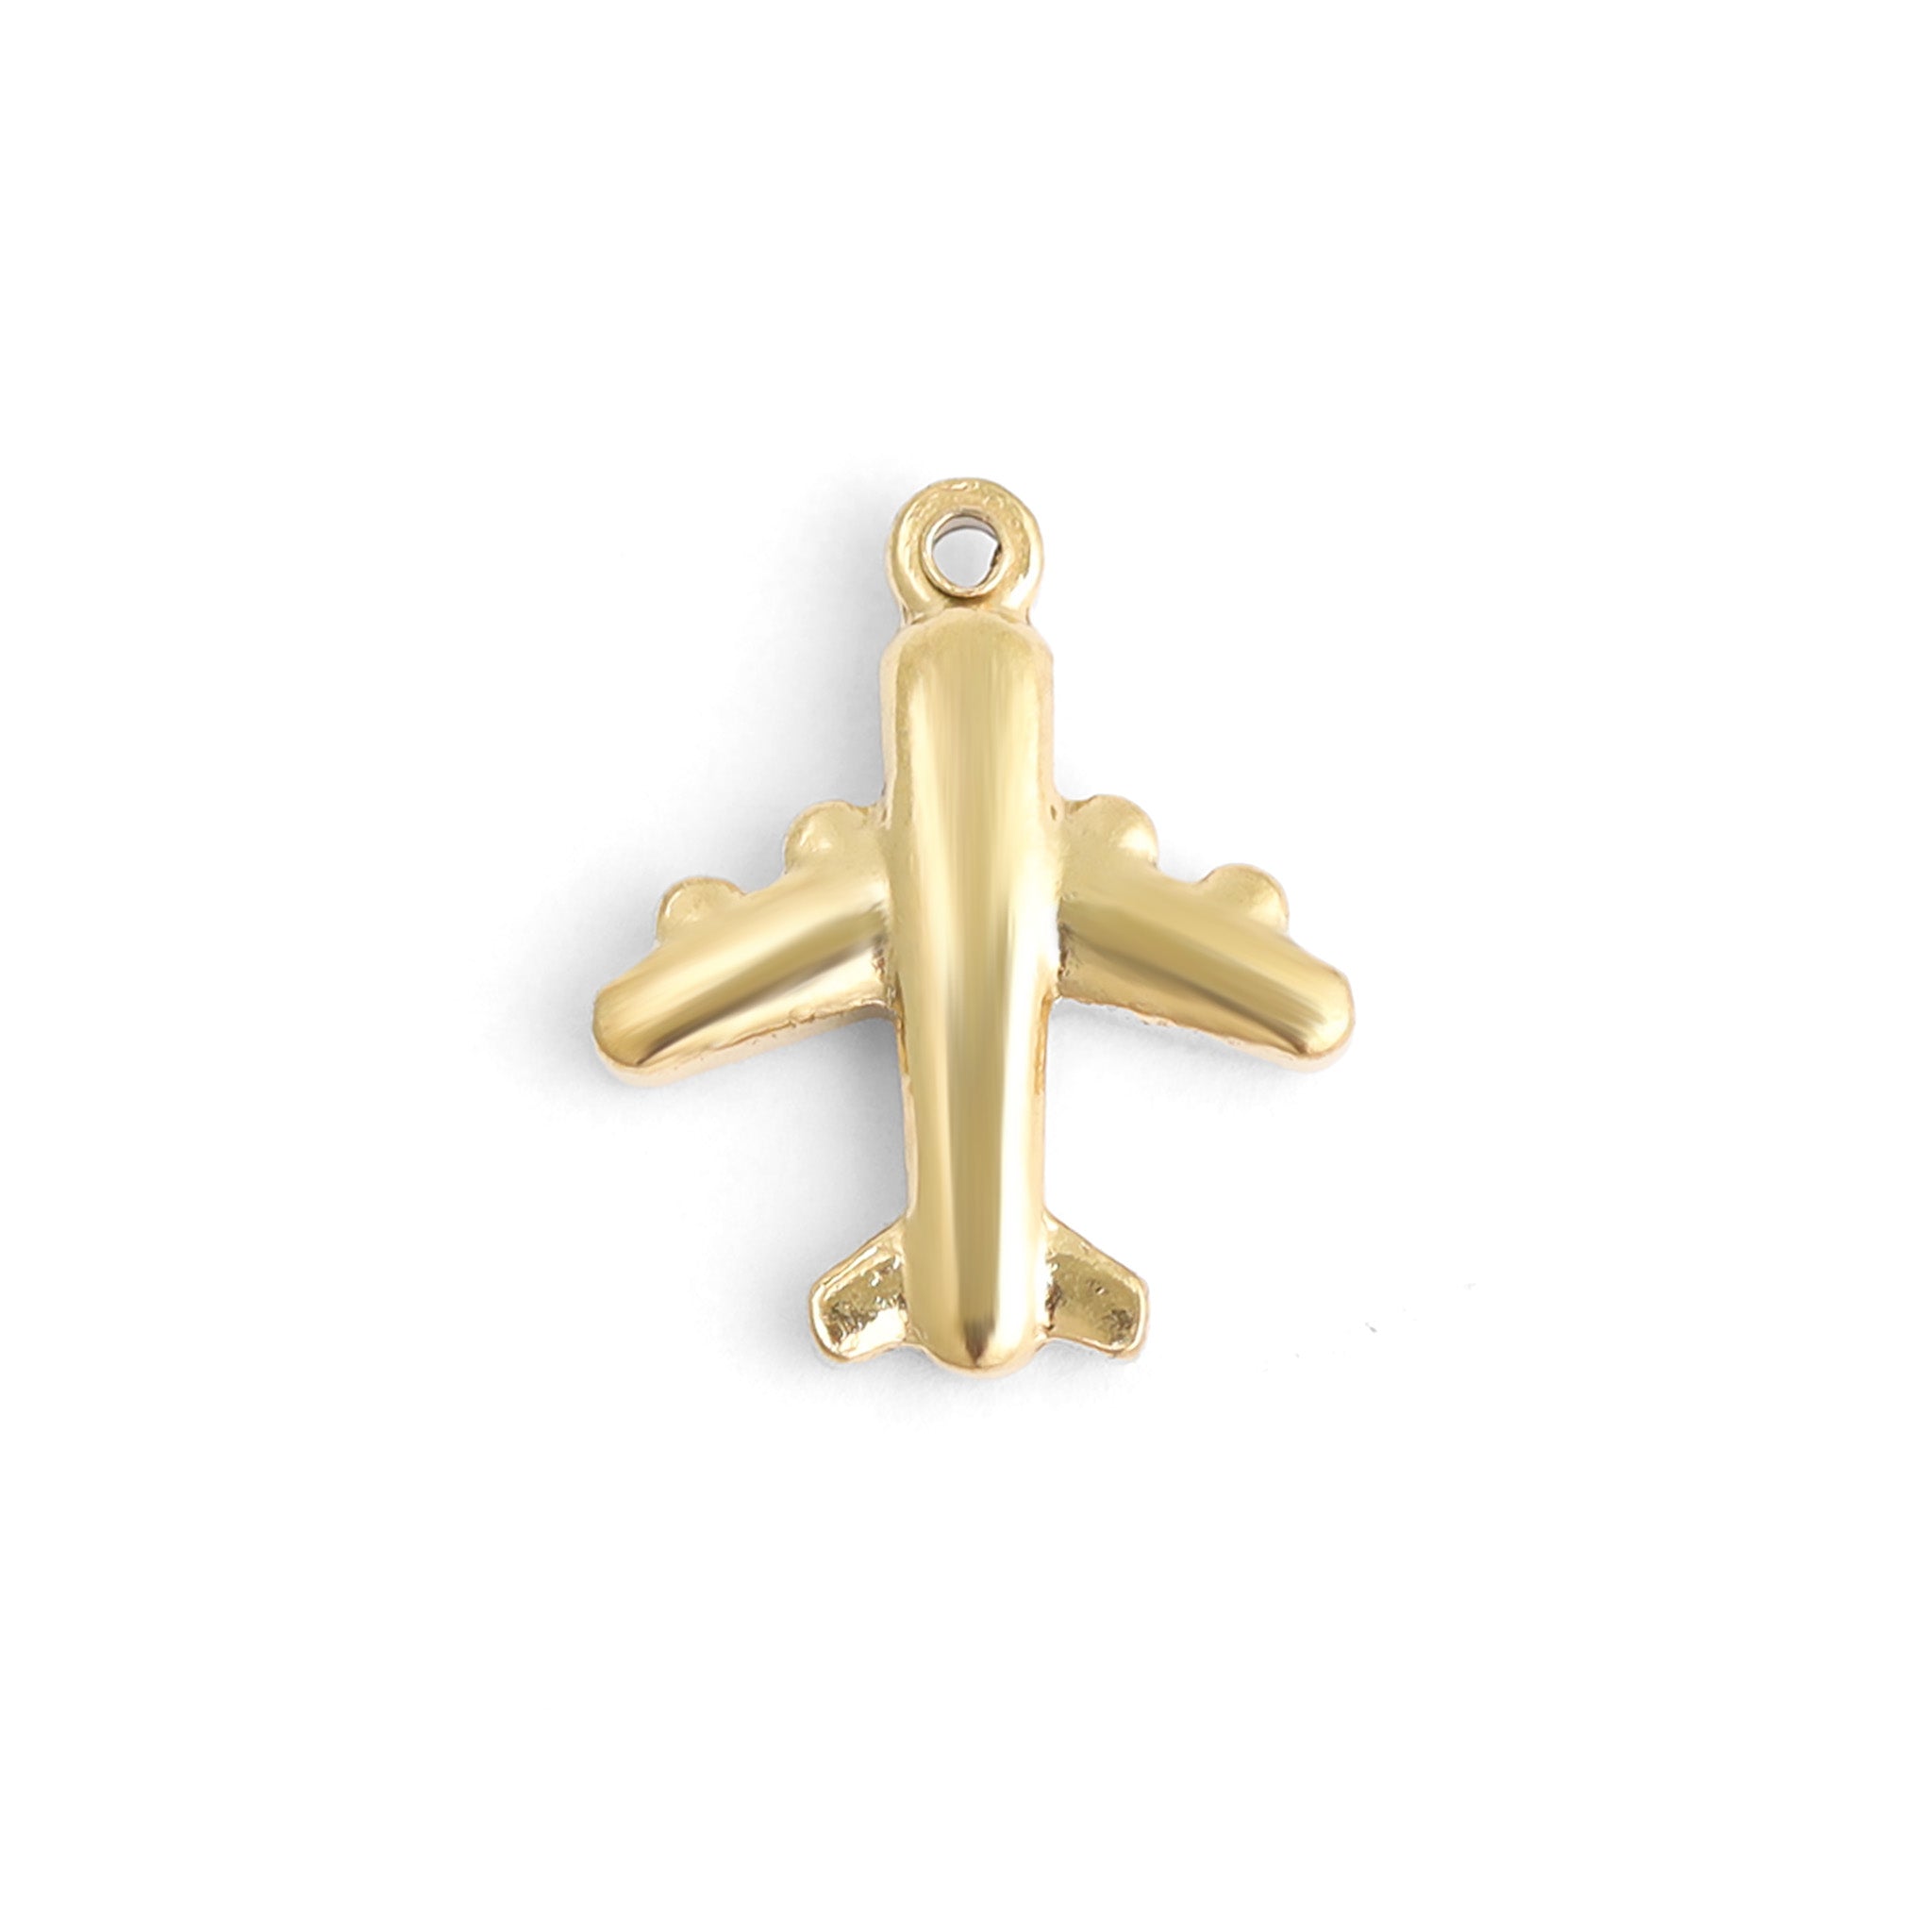 18K Gold PVD Stainless Steel Airplane Charm / PDL0095